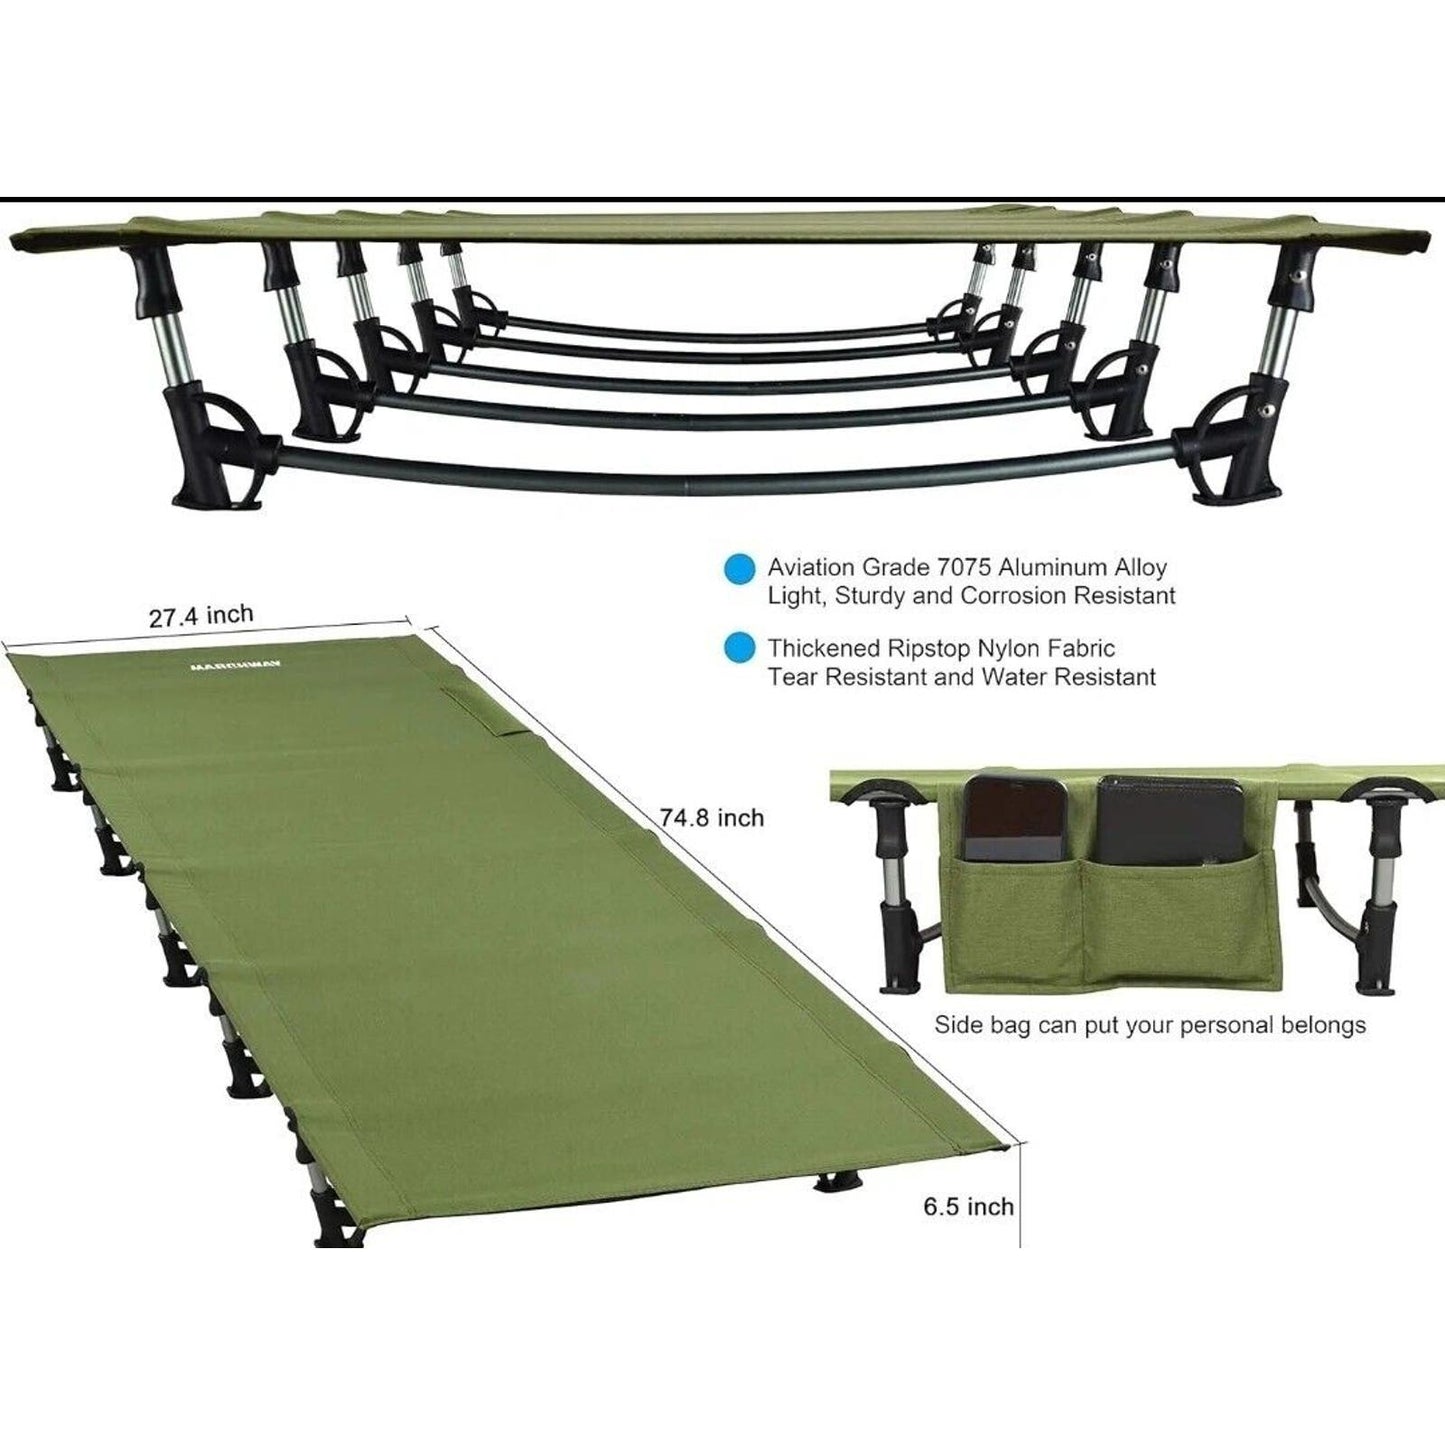 Folding Cot For Camping, Portable, Lighweight, Compact, Green - MARCHWAY